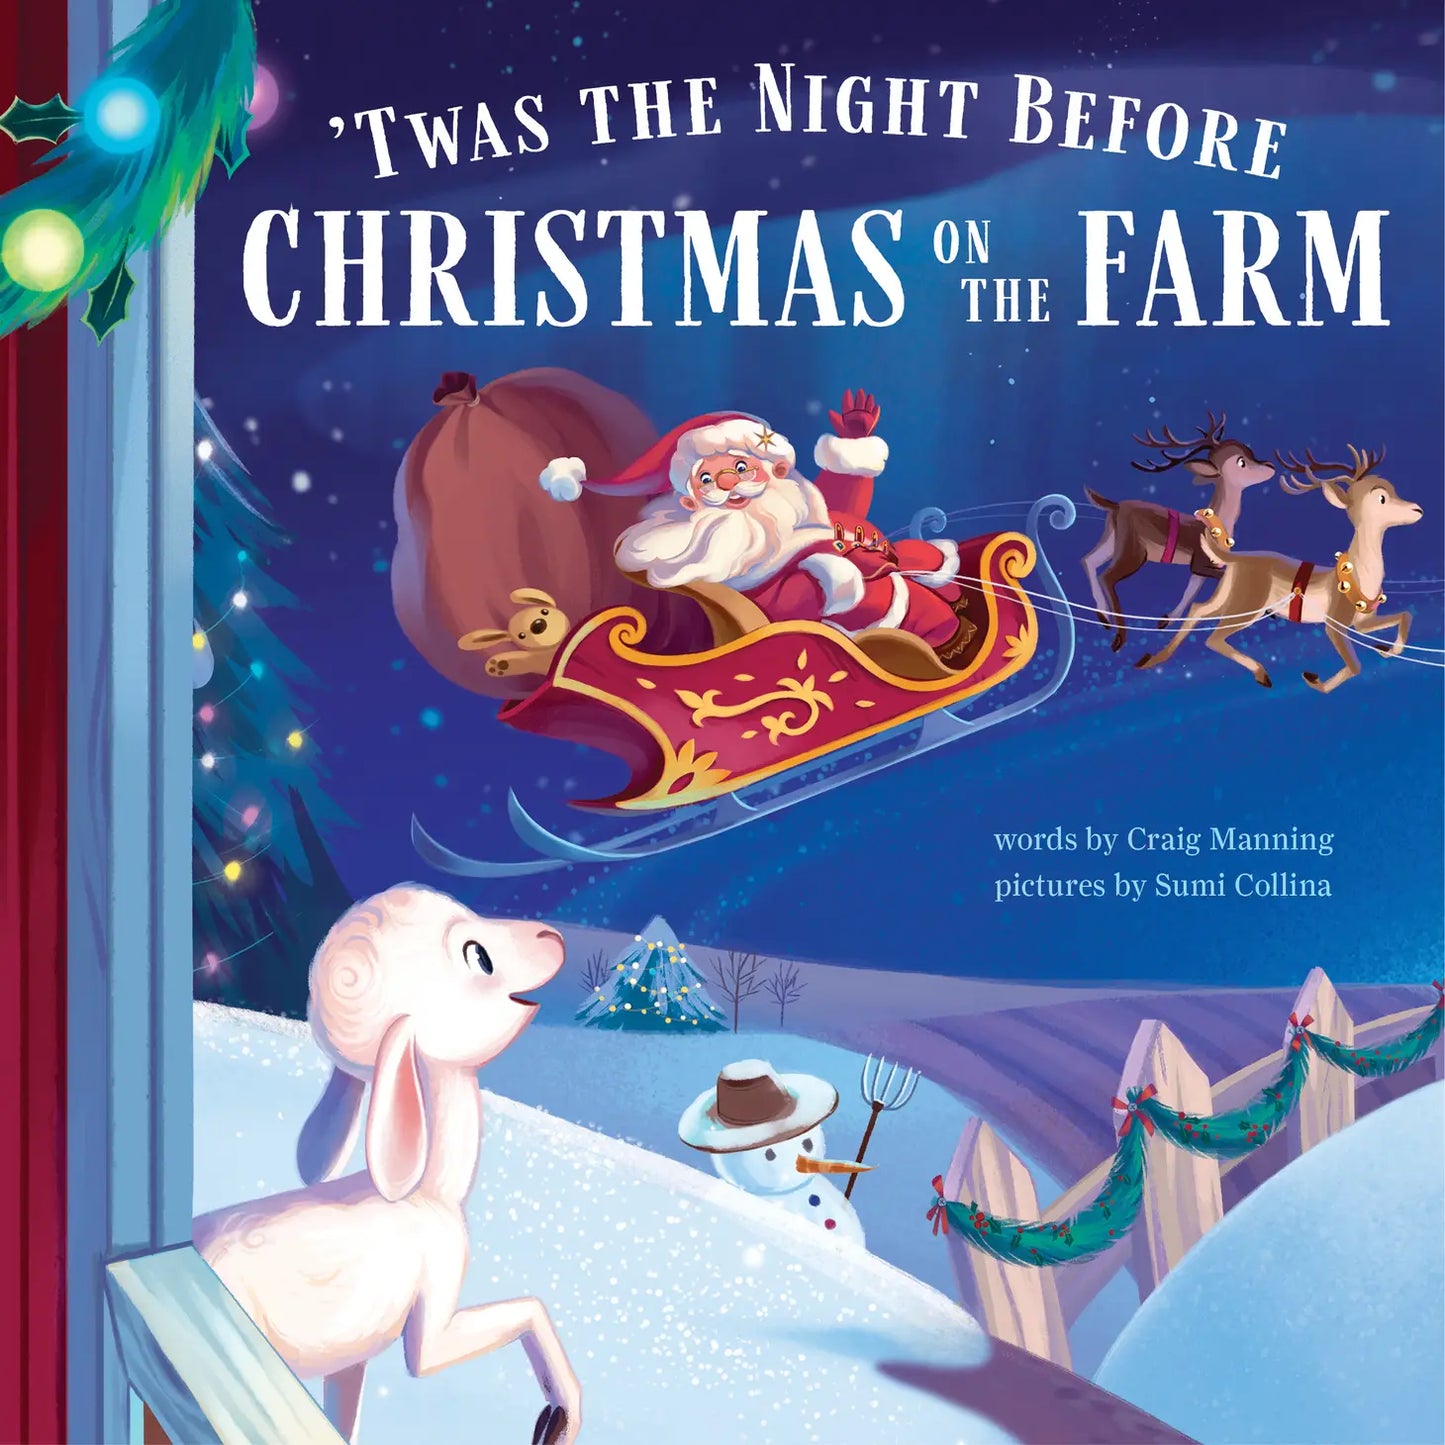 ‘Twas the Night Before Christmas on the Farm